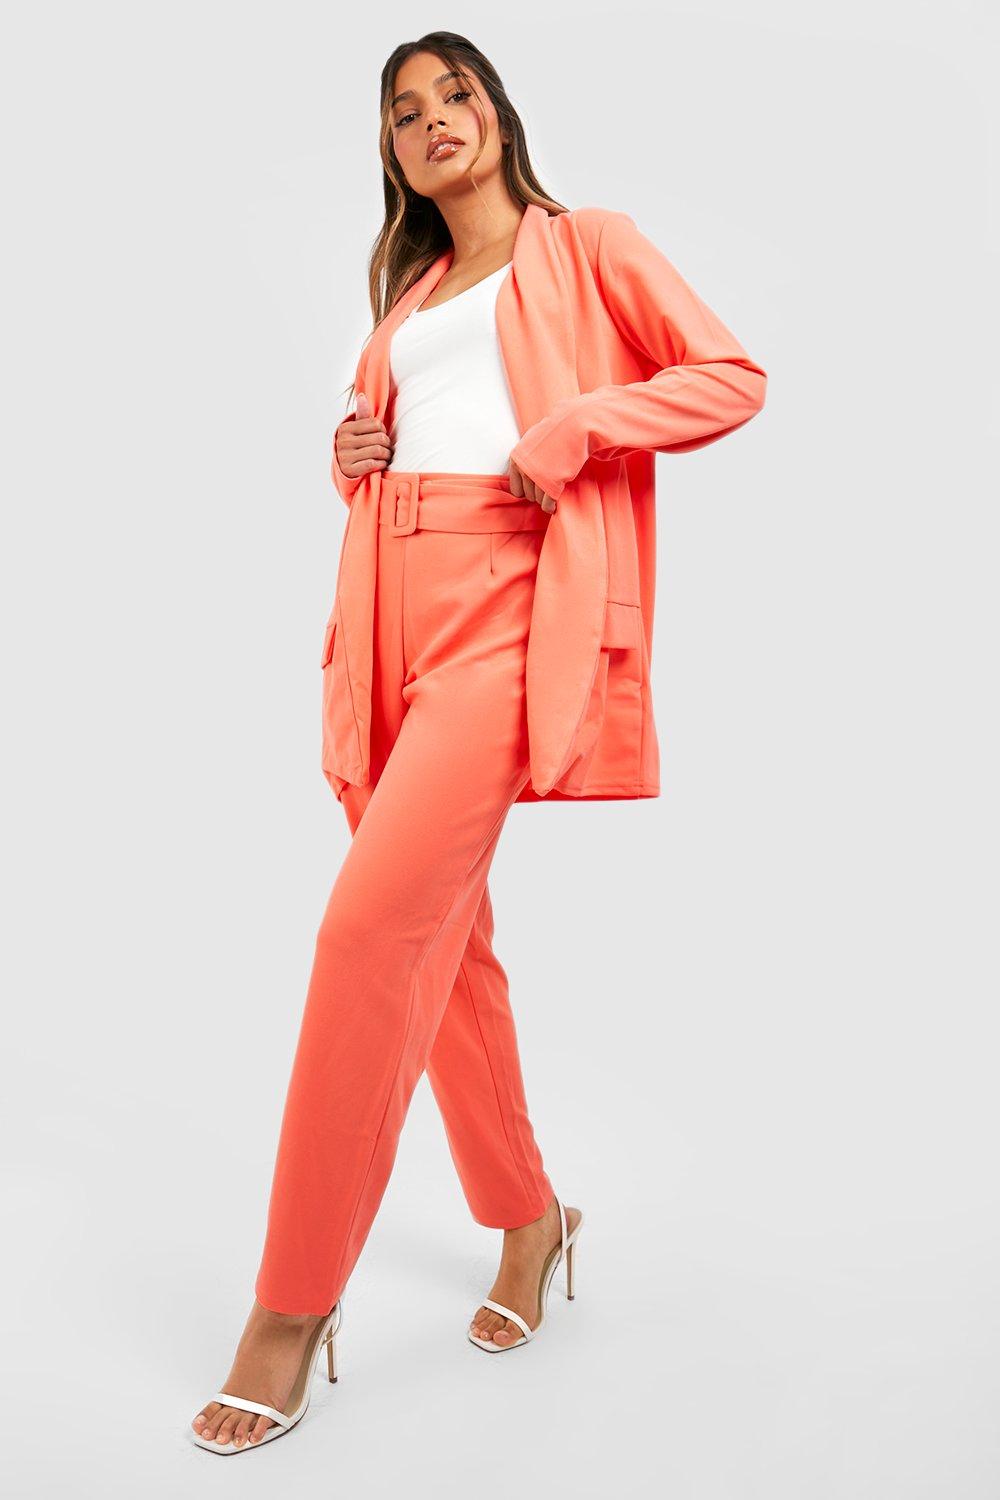 boohoo Women's Tailored Blazer And Self Fabric Belt Trouser Suit|Size: 8|coral